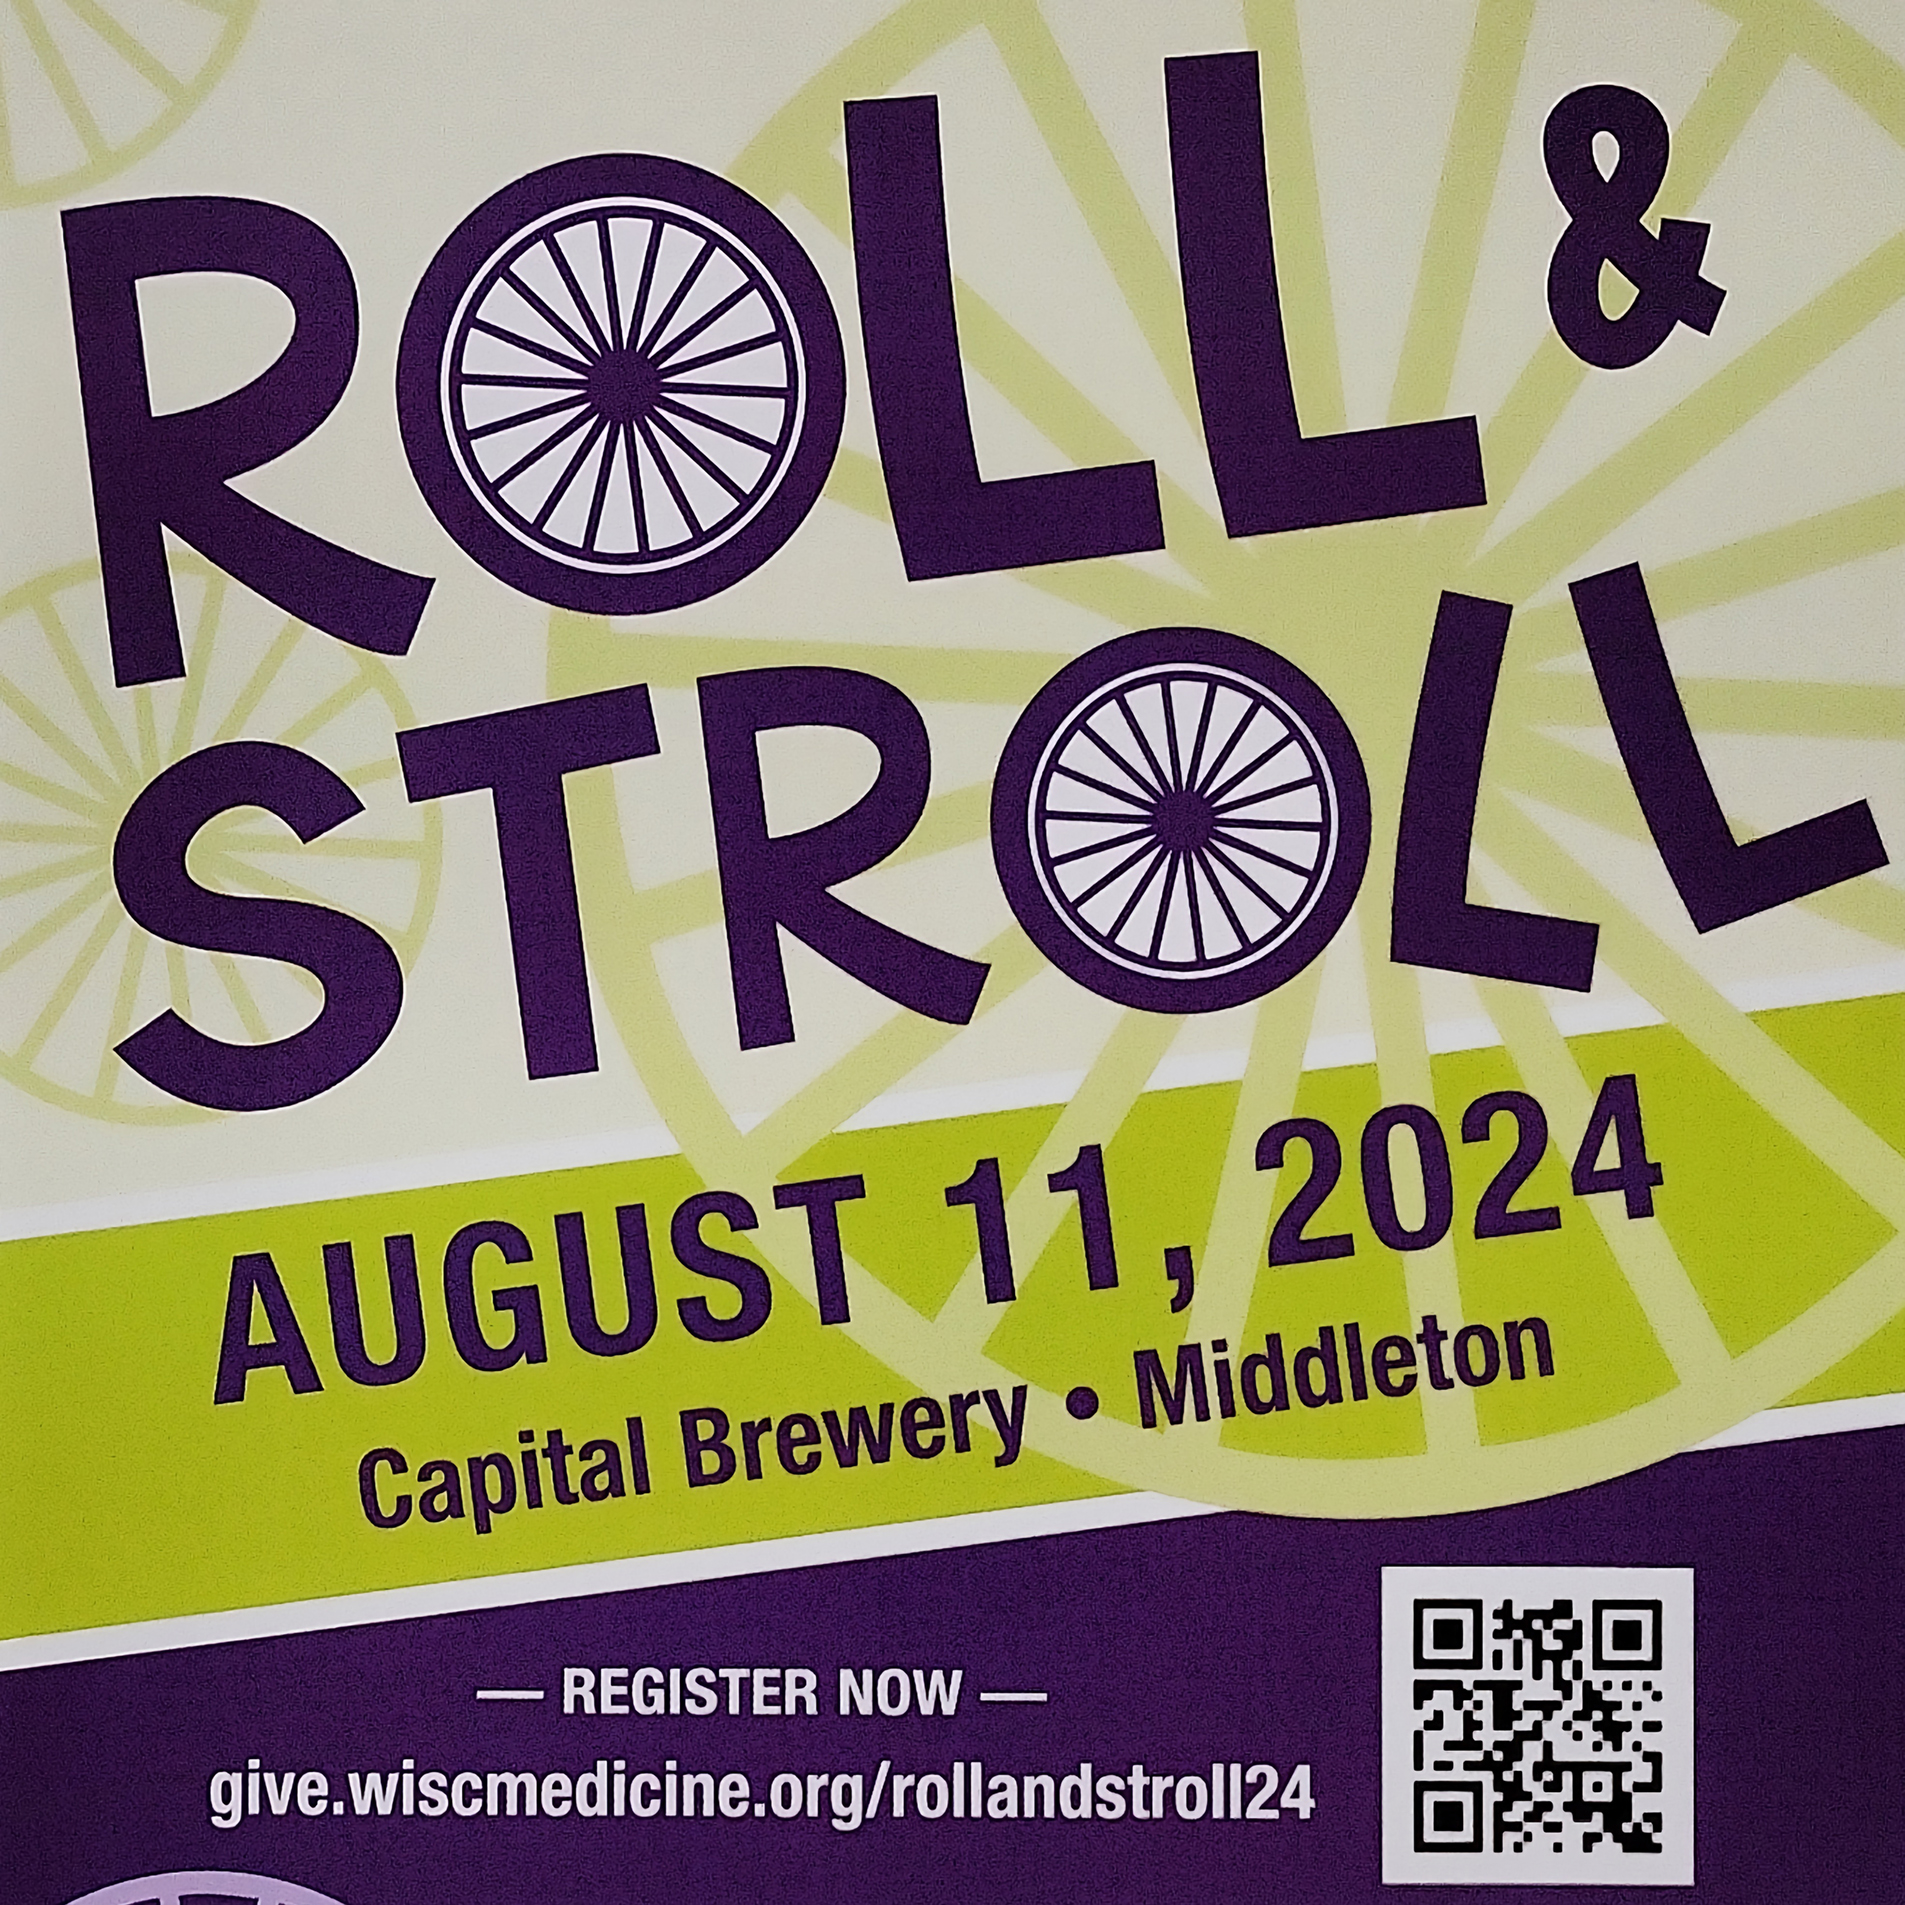 Promotional poster for the "roll & stroll" event on august 11, 2024, at capital brewery in middleton, featuring event details and a qr code for registration.